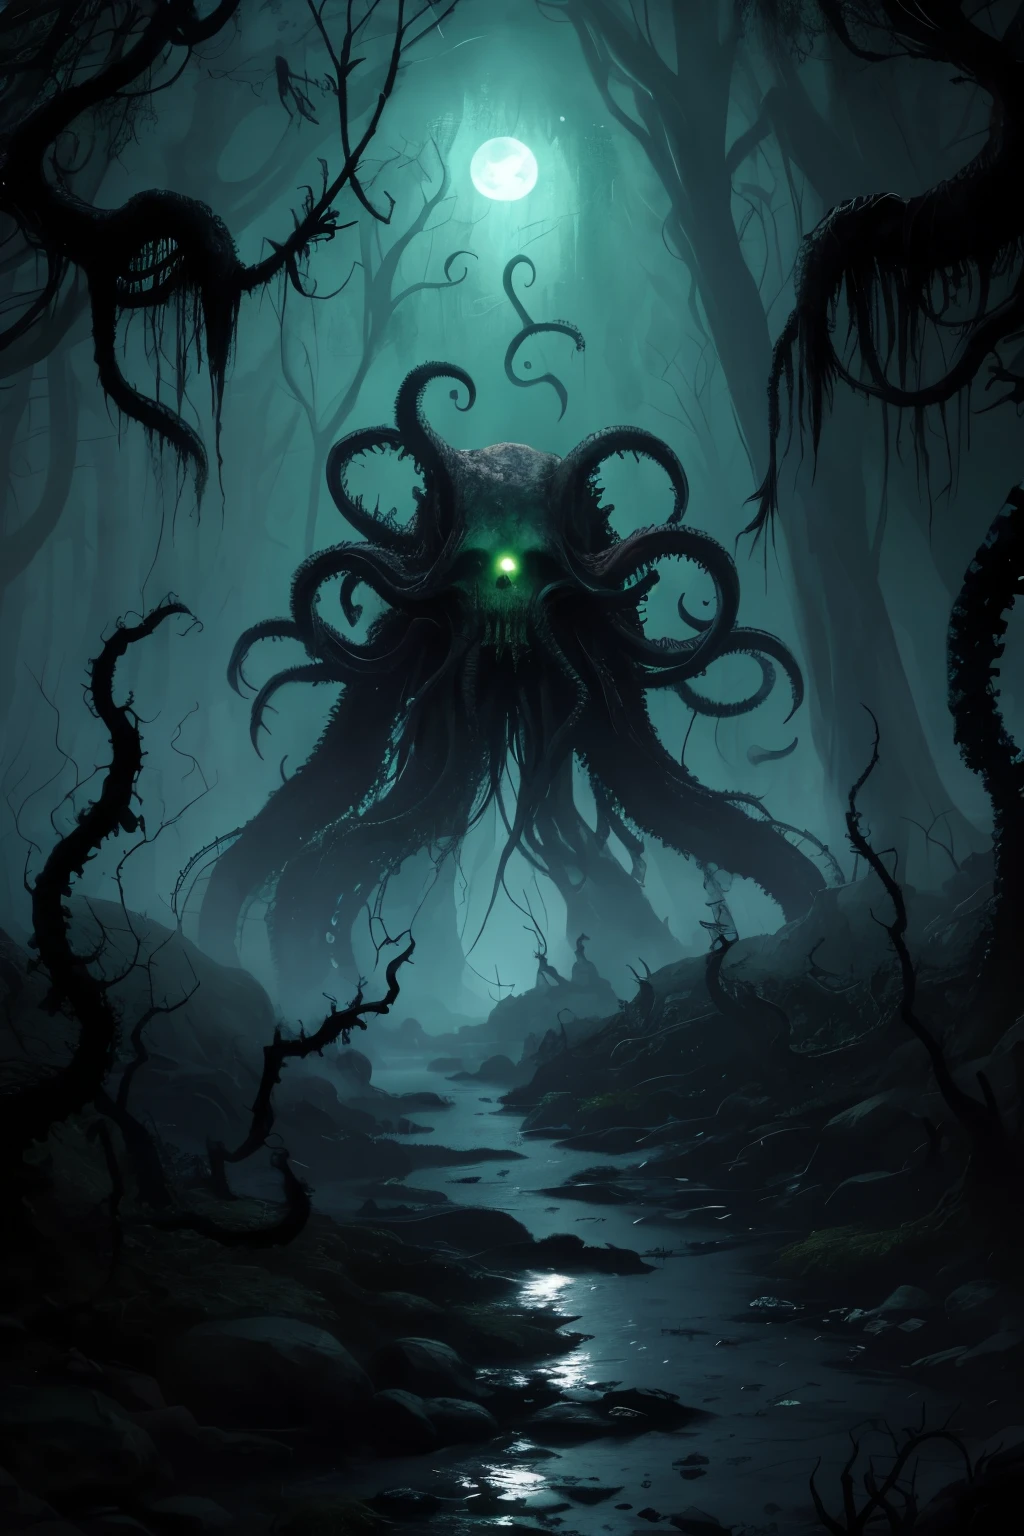 Archaic Lovecraftian entity, Cthulhu, emerges from the murky abyss, adorned with a skull-like visage and sinewy octopus tendrils. The swampy depths, grimy with moss and vines, churn violently as the creature rises, casting a haunting silhouette against the backdrop of fireflies, their ethereal glow illuminating the midnight moonlight, creating an otherworldly and chilling atmosphere. (masterpiece:1.2) (illustration:1.2) (best quality) (detailed) (intricate) (8K) (HDR) (wallpaper)